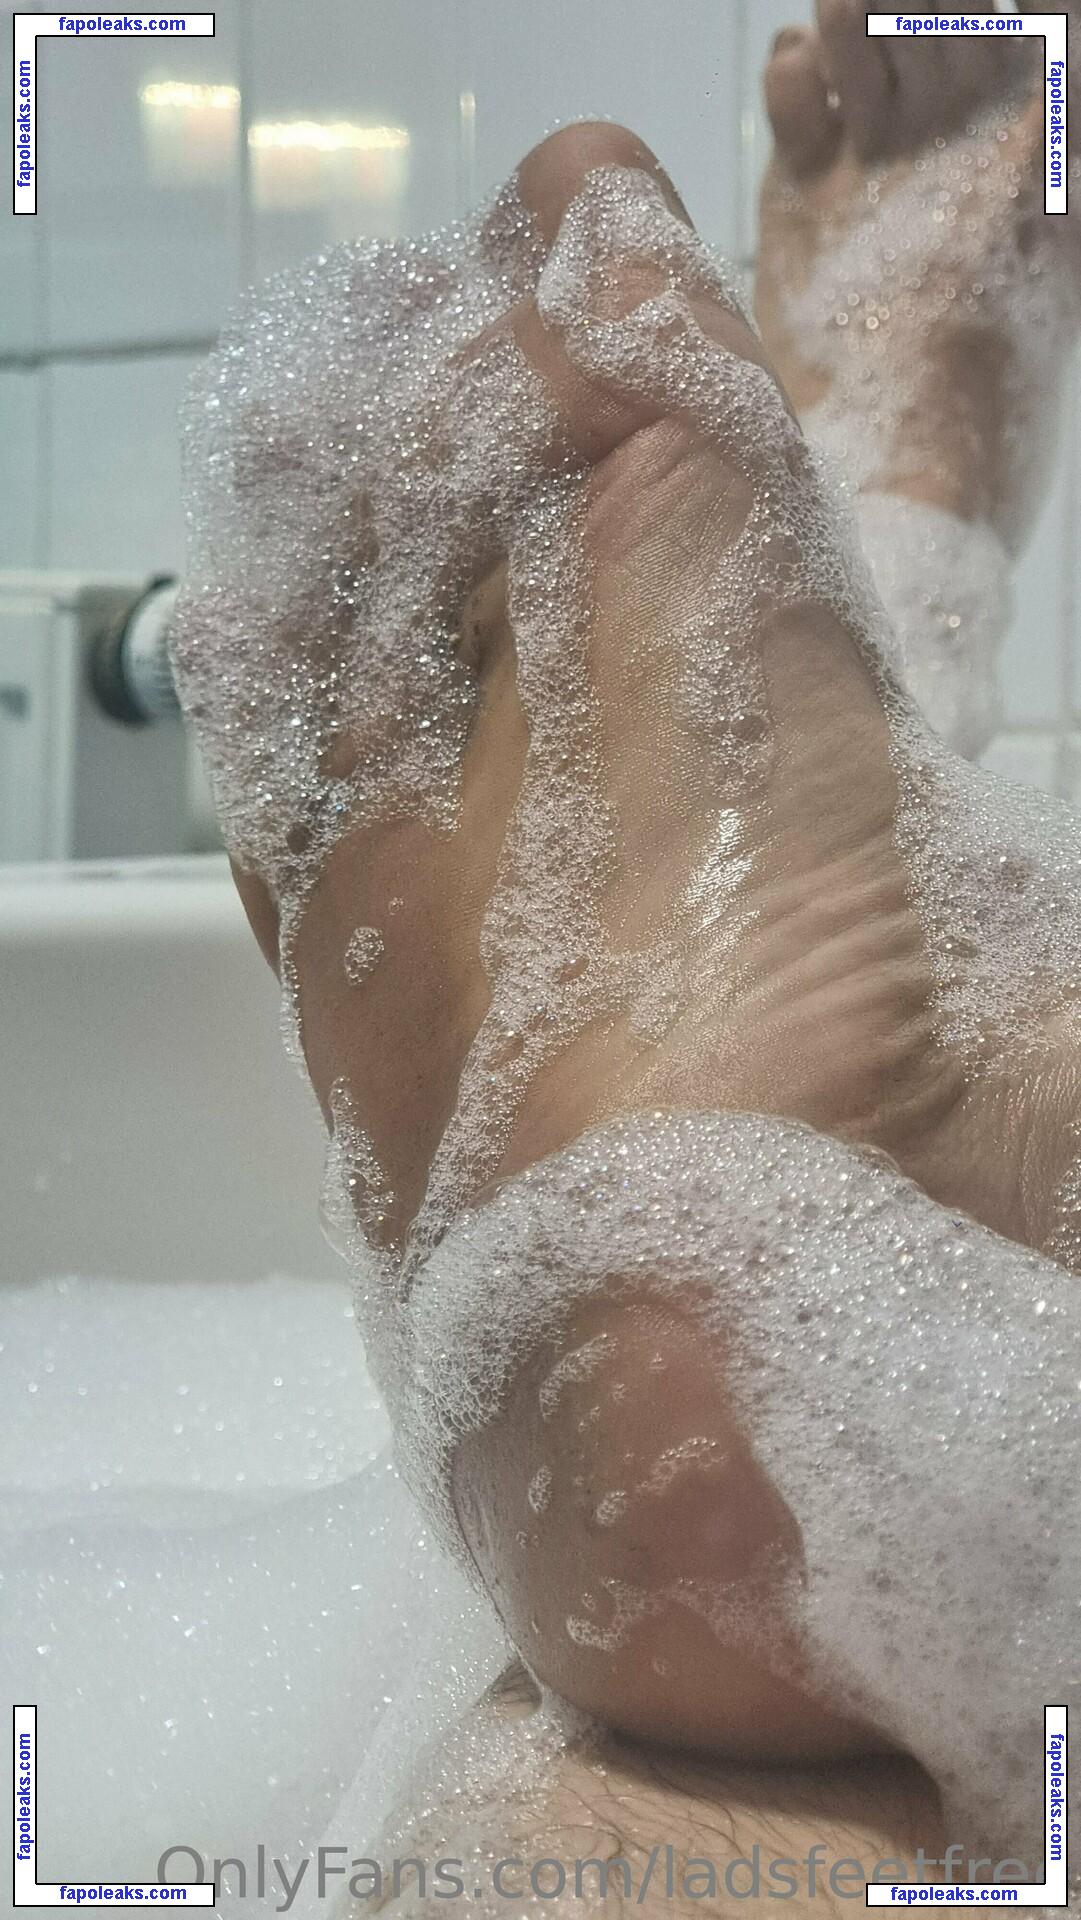 ladsfeetfree / icecat_laflareee nude photo #0075 from OnlyFans